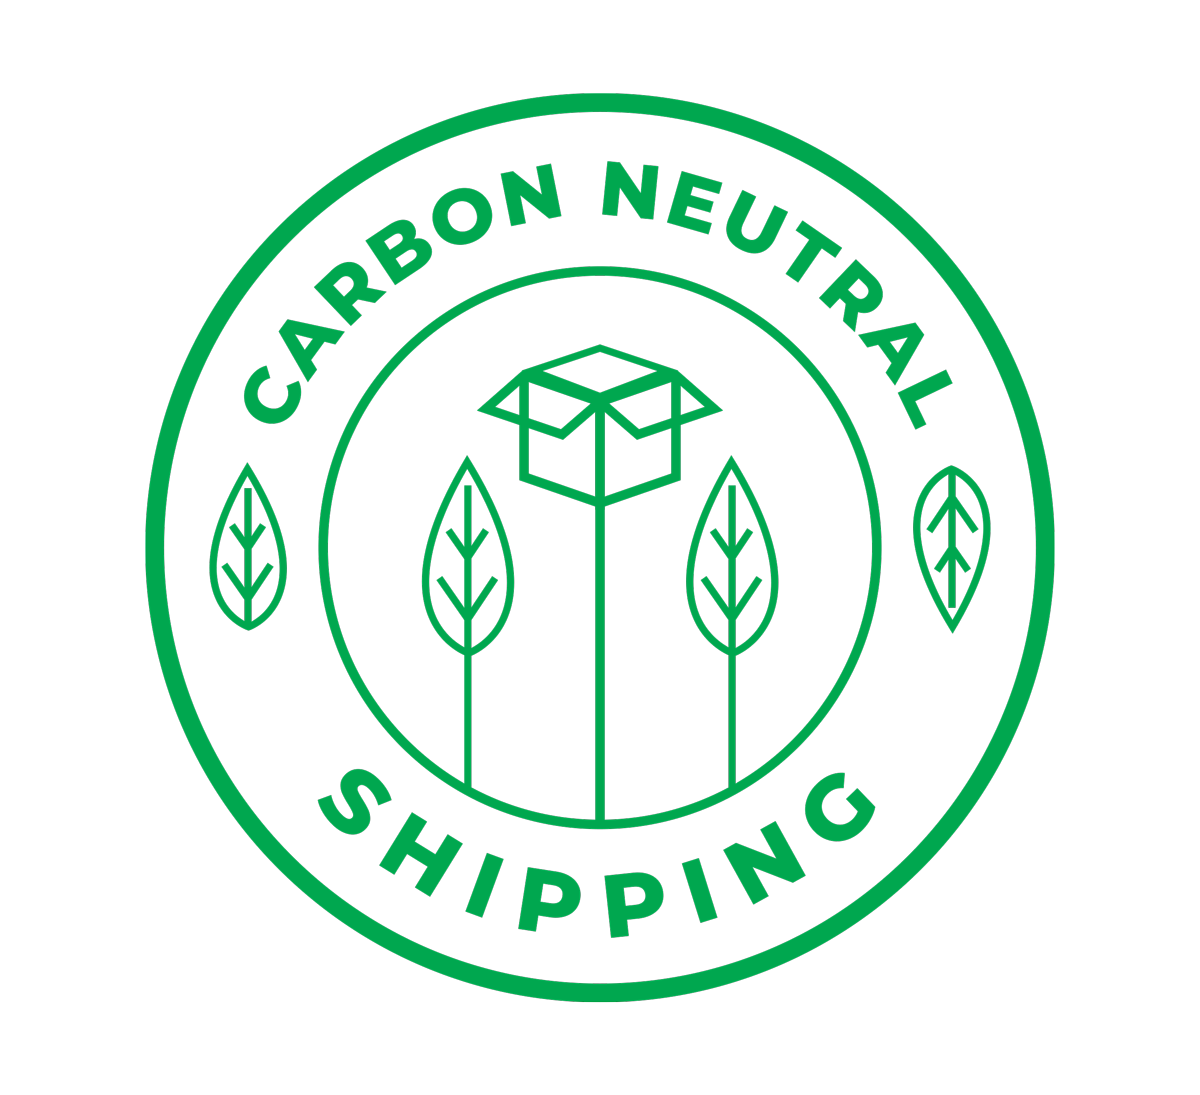 Emblem representing carbon neutral shipping with an icon of a package and leaves, symbolizing eco-friendly delivery services.